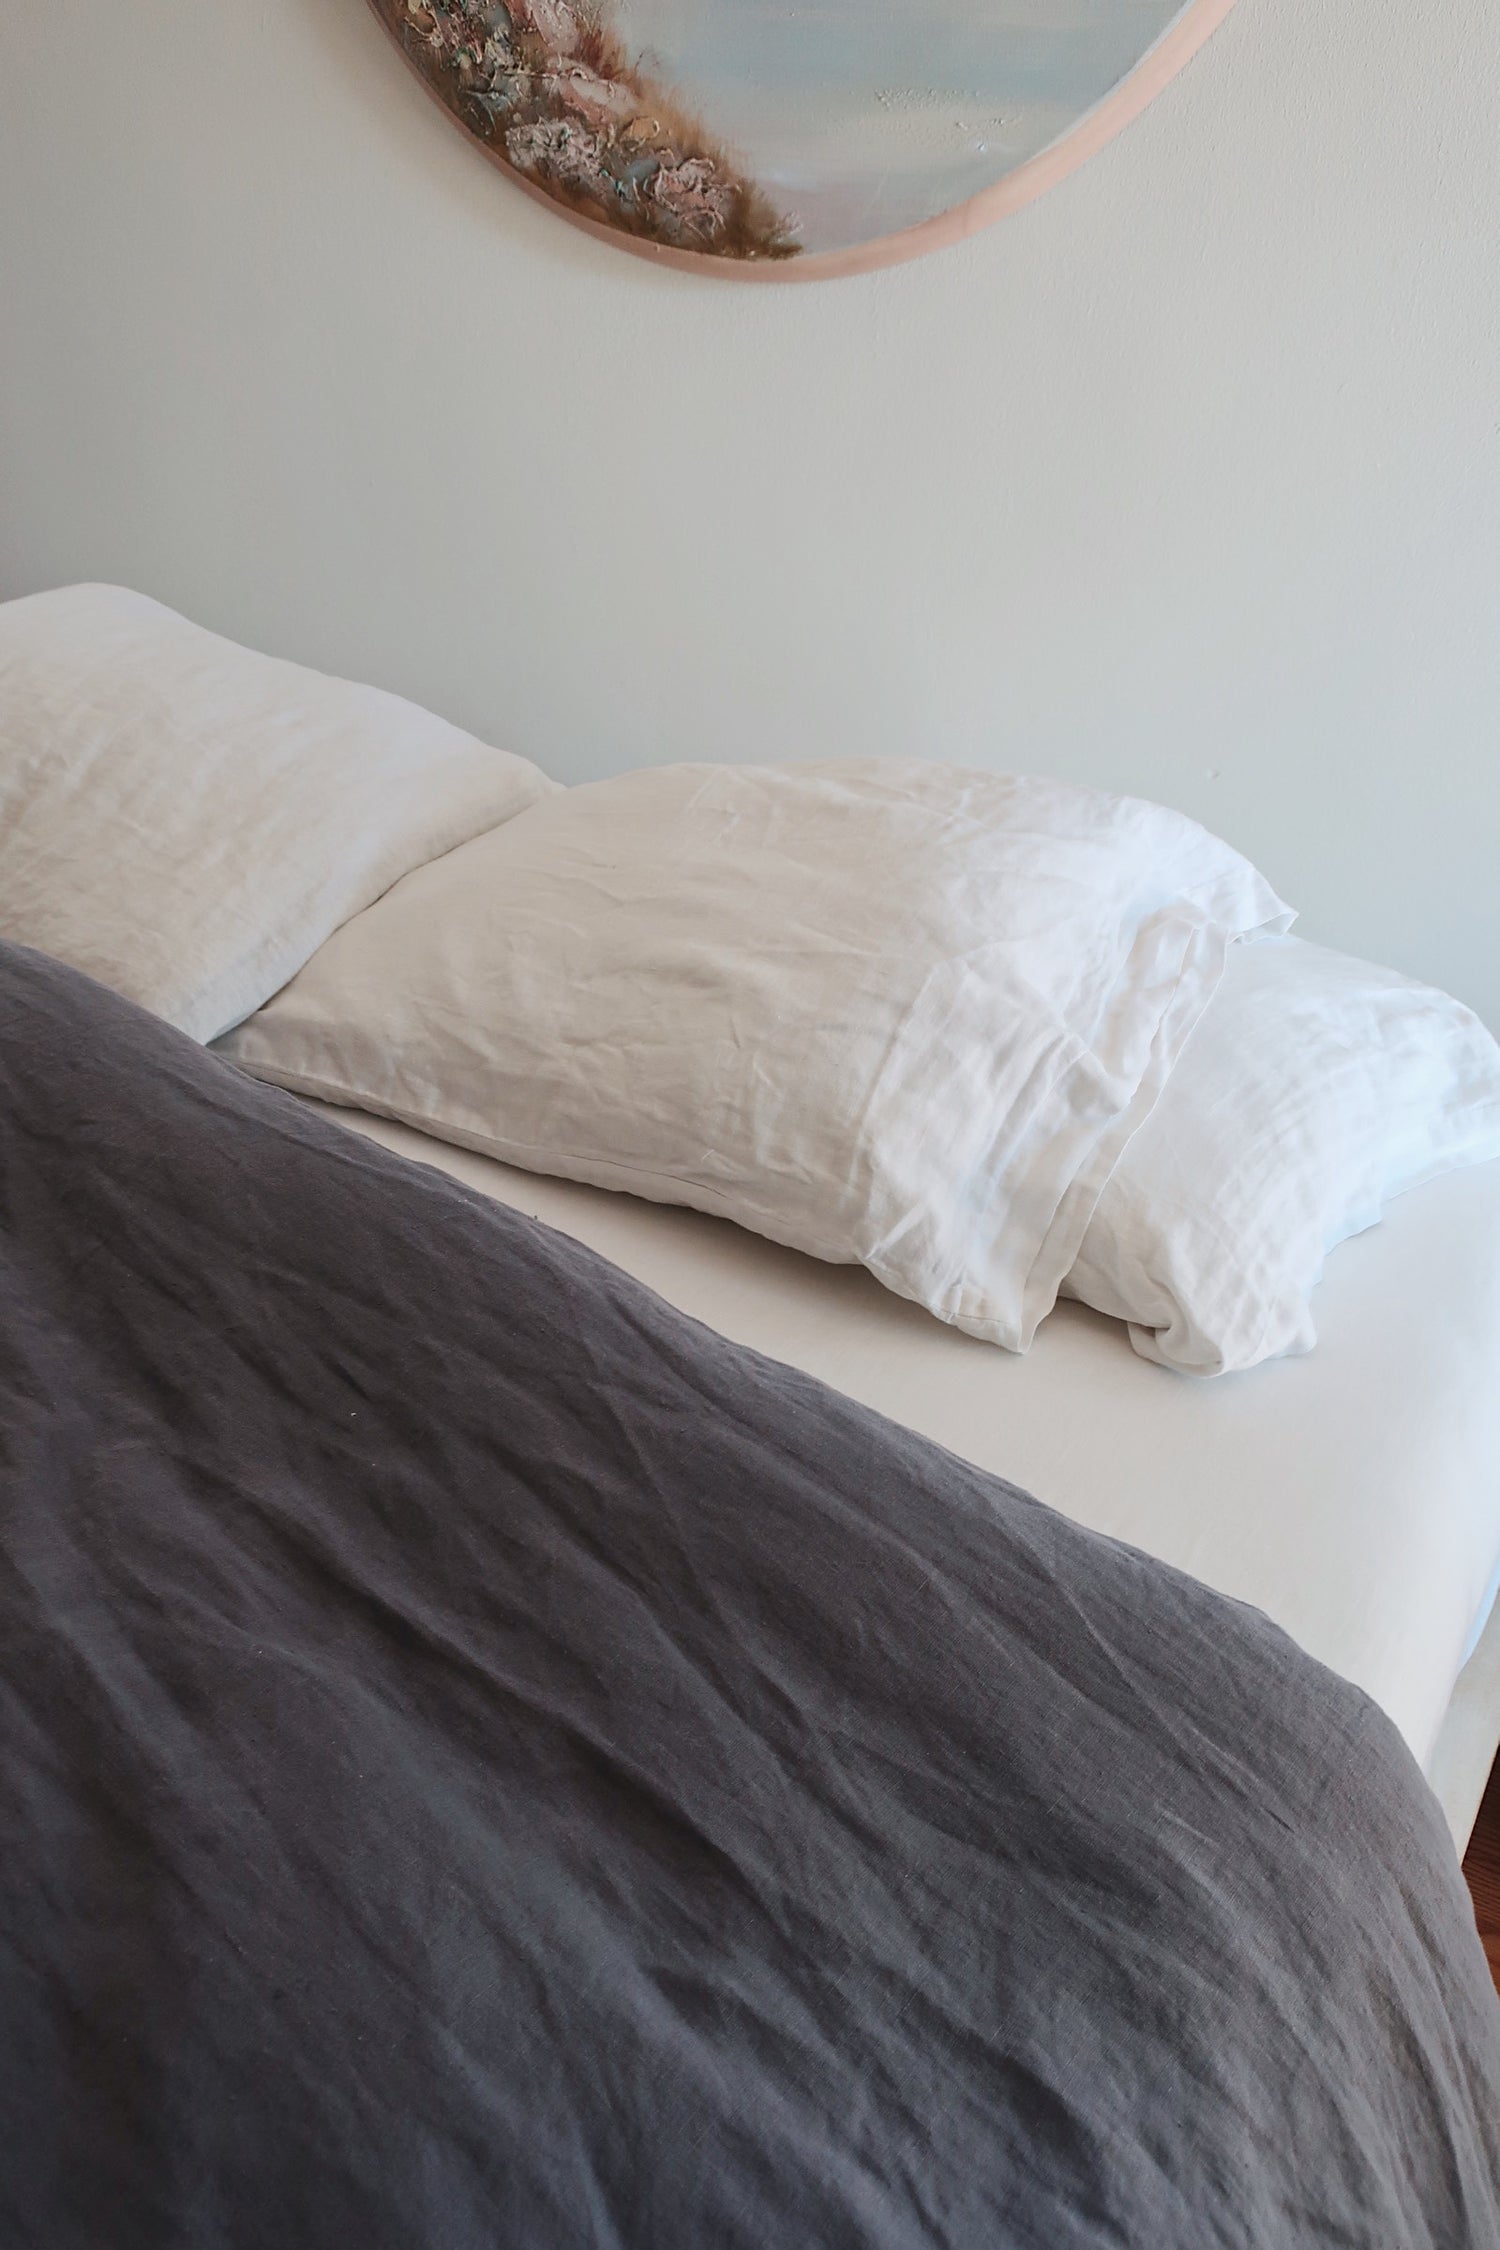 bed with hemp bedding. white pillowcases and fitted sheet and a navy duvet cover